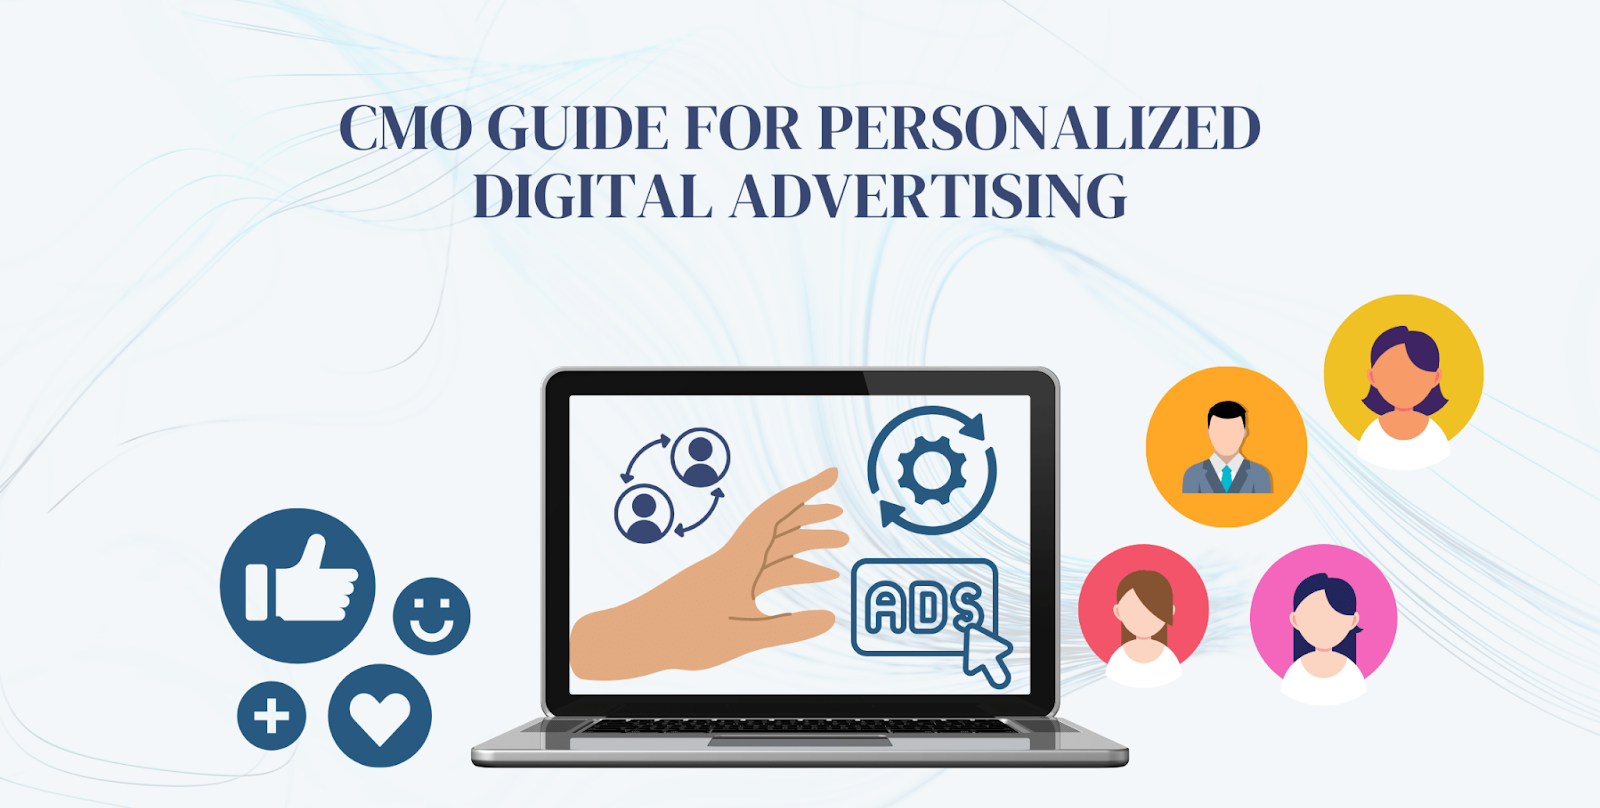 CMO Guide For Personalized Digital Advertising: